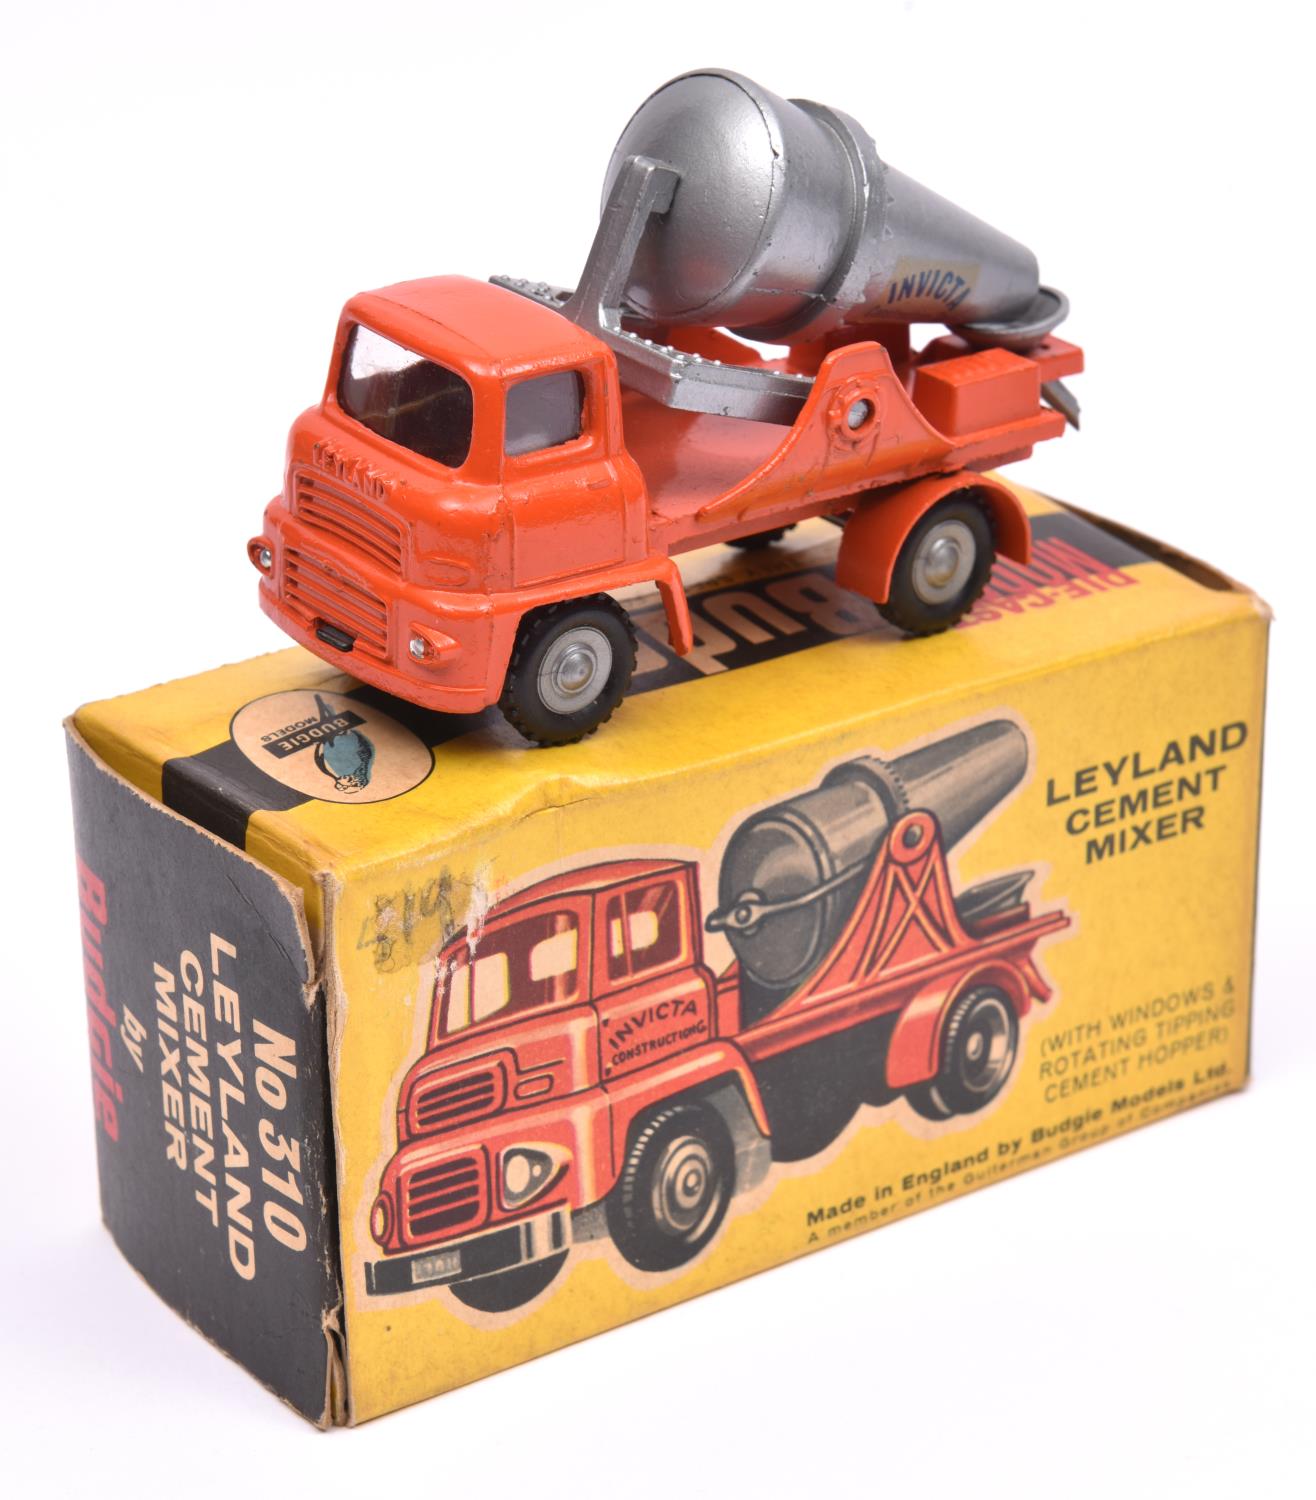 Budgie Toys Leyland Cement Mixer (310). In orange with silver rotating drum, 'Invicta' on drum, with